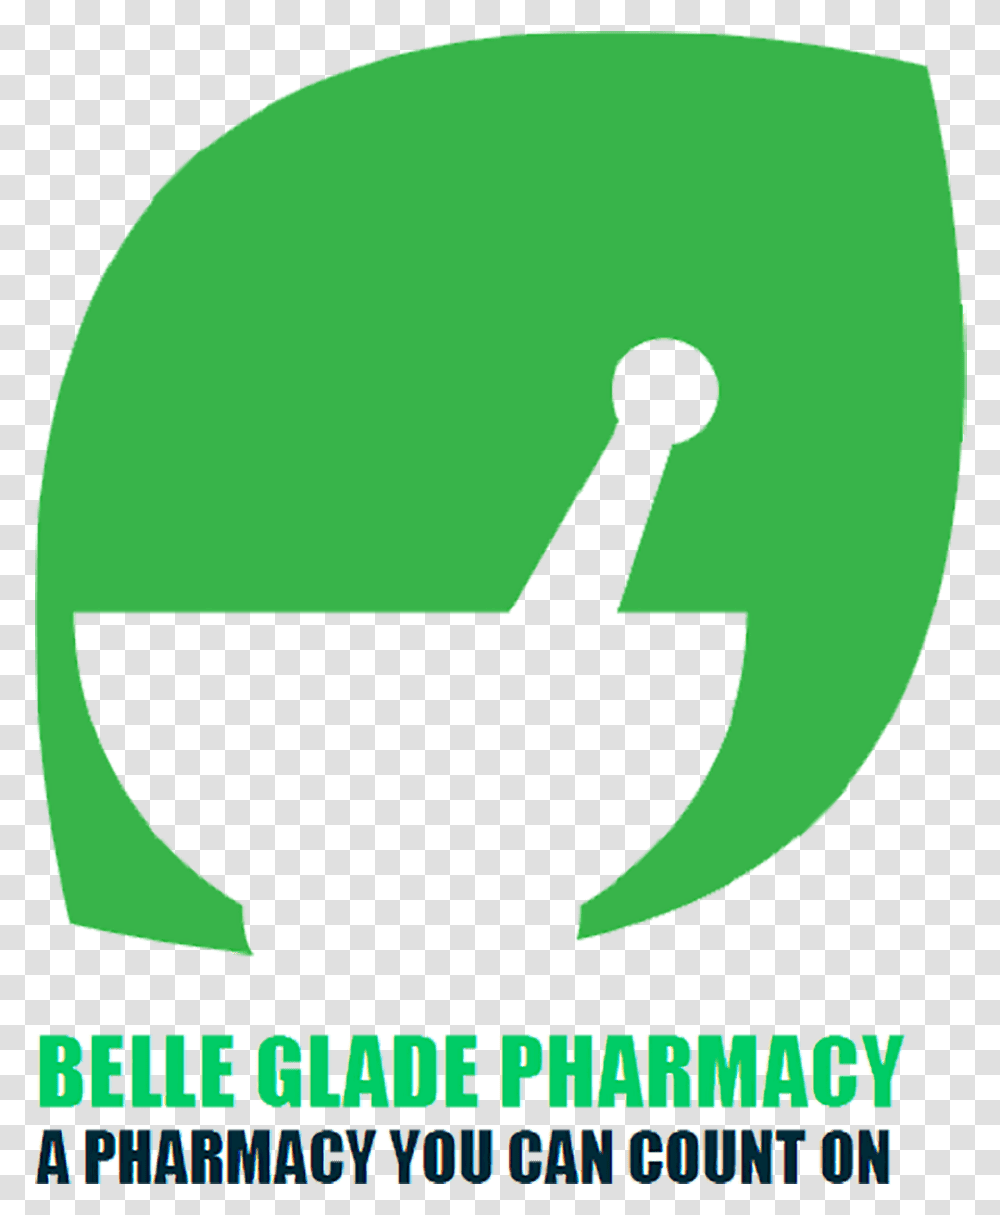 Belle Glade Pharmacy Graphic Design, Cannon, Weapon, Weaponry, Poster Transparent Png